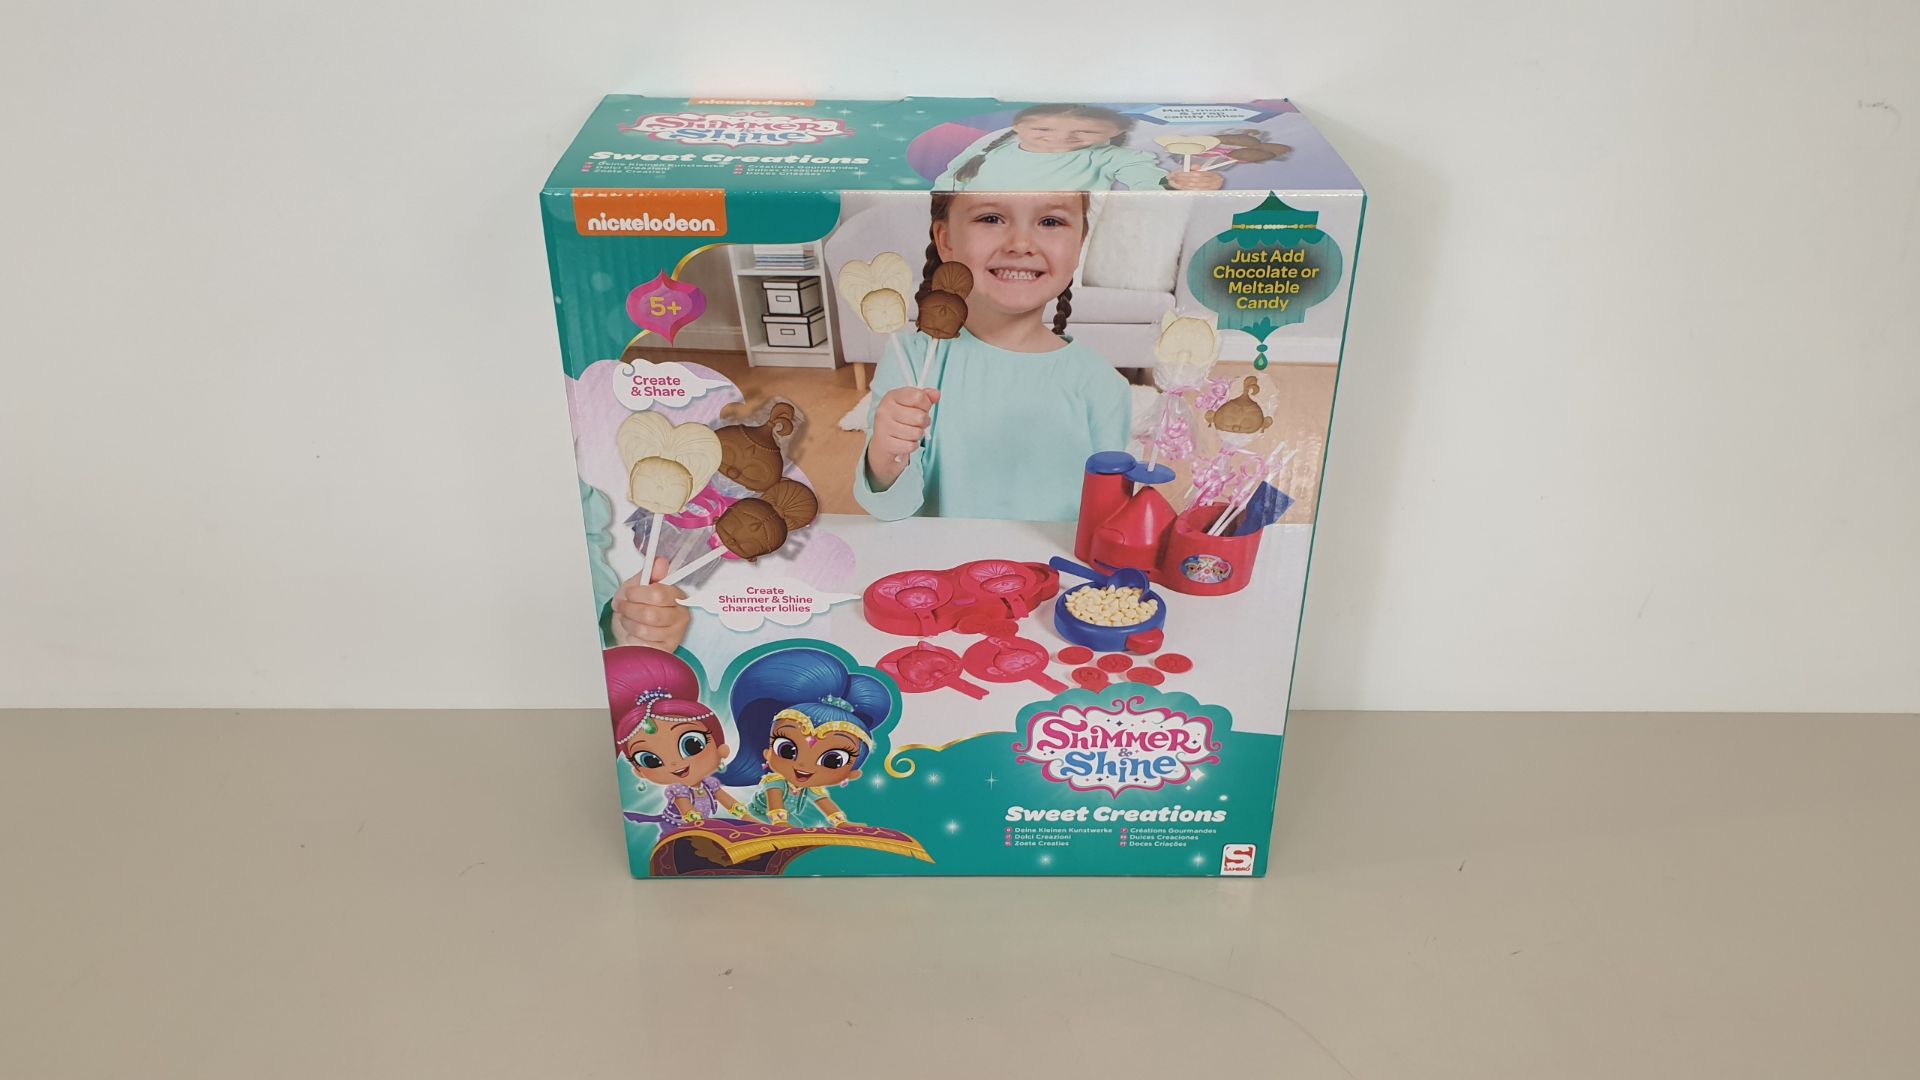 30 X BRAND NEW NICKELODEON SHIMMER & SHINE SWEET CREATIONS, CONTAINING MOULDS, WRAPPERS, STICKS,